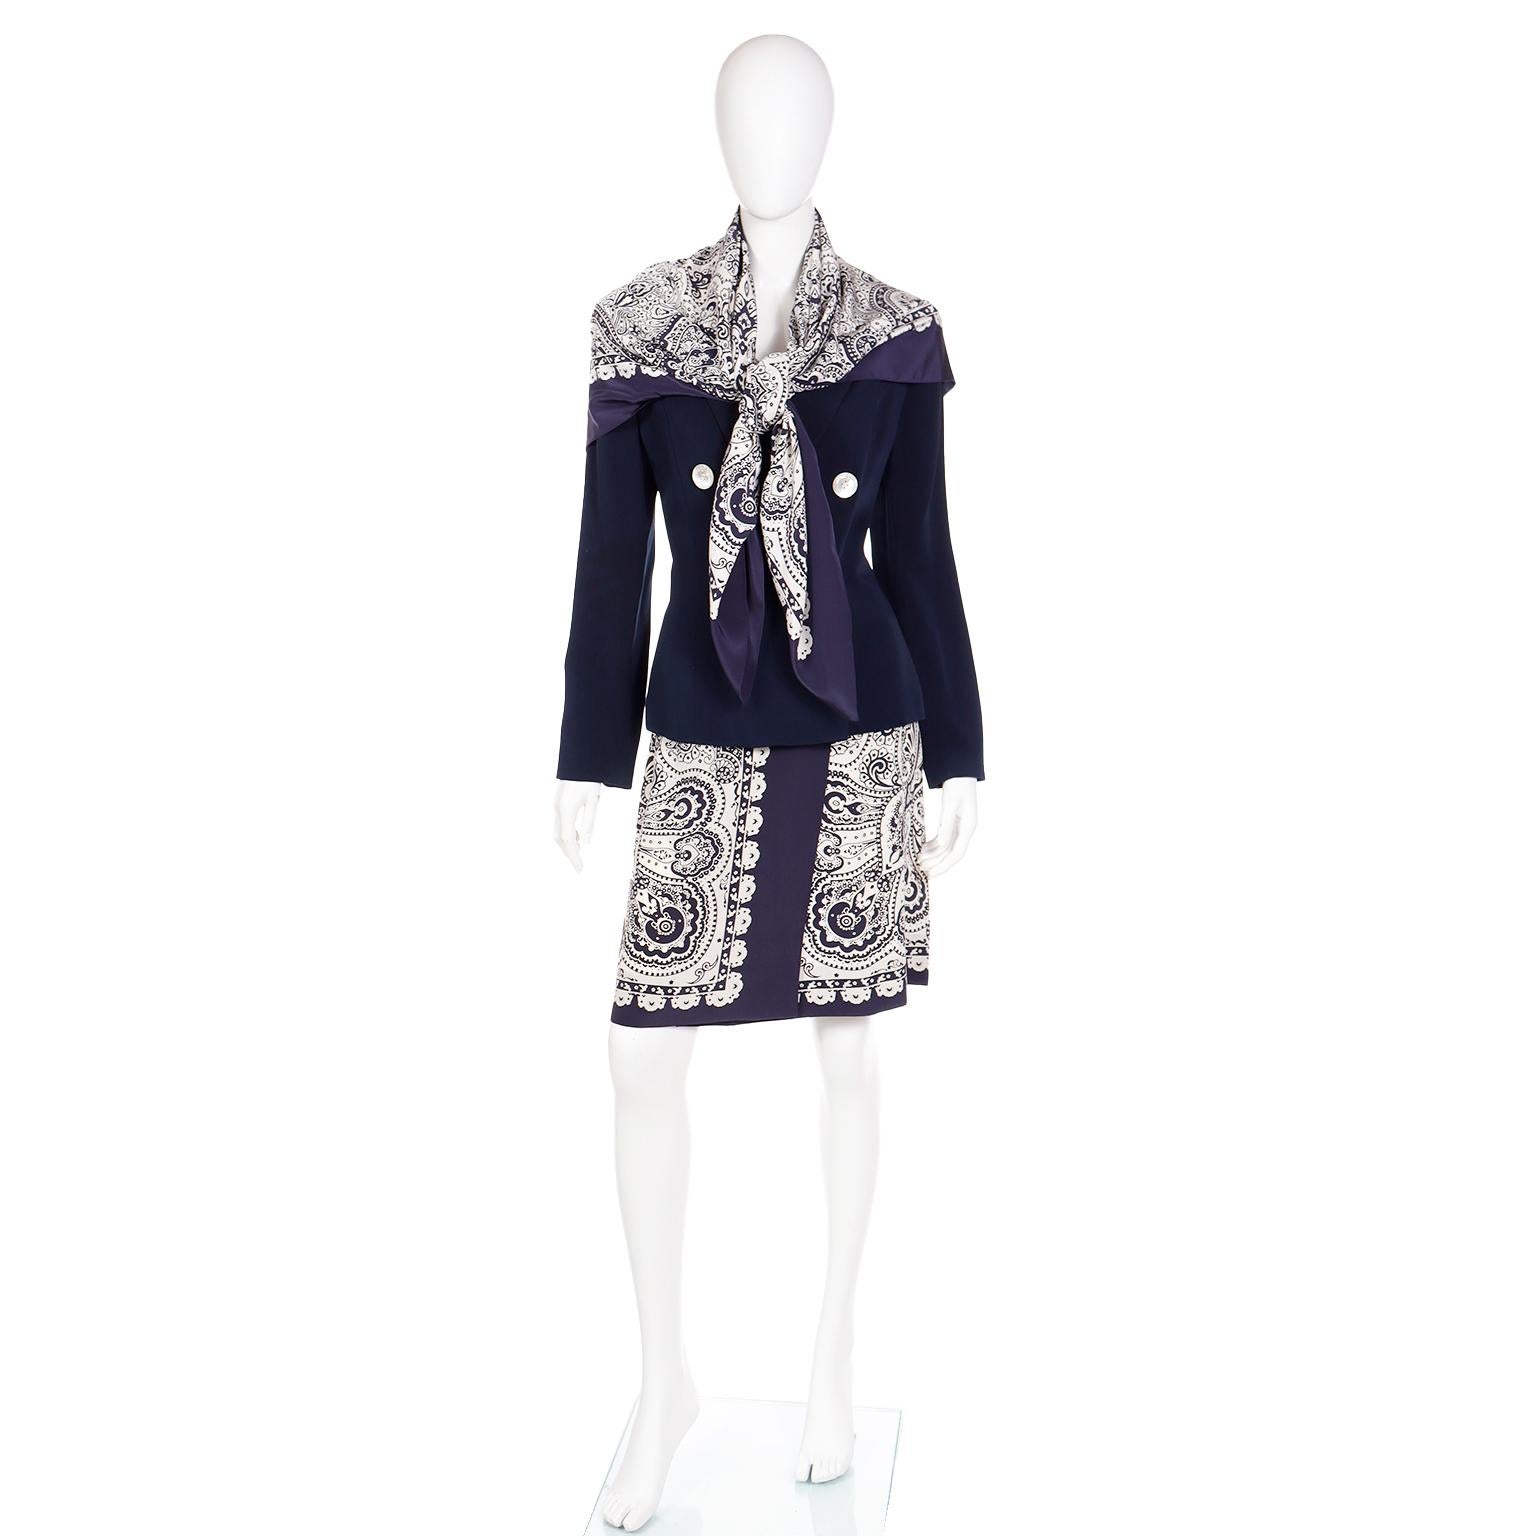 Albert Nipon was designed by Albert's dynamic wife, Pearl. She designed clothing for women professional women, like herself, who still wanted to have a touch of femininity in their clothing. This 3 piece ensemble is a great example of the Nipon